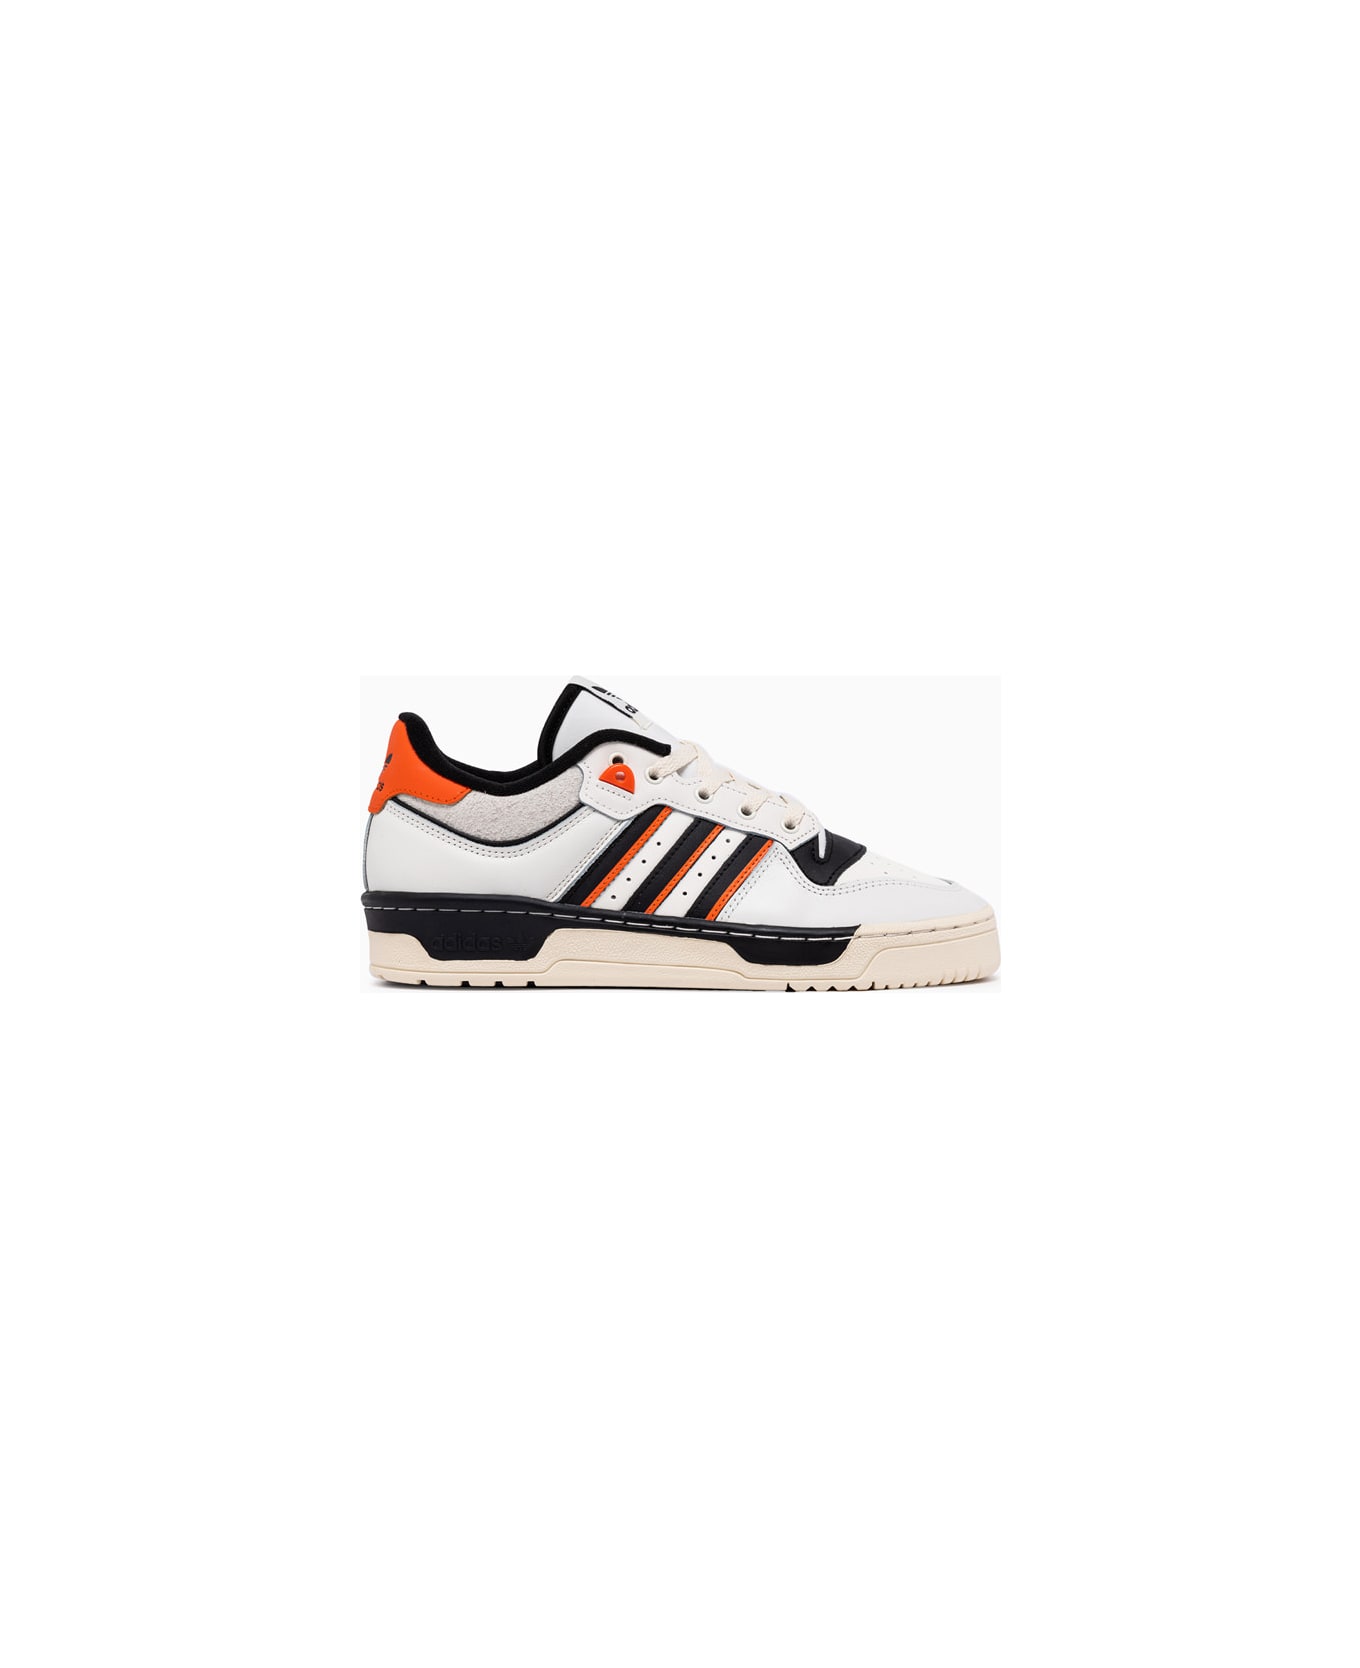 Adidas Rivalry 86 Low Sneakers Ie7140 - WHITE